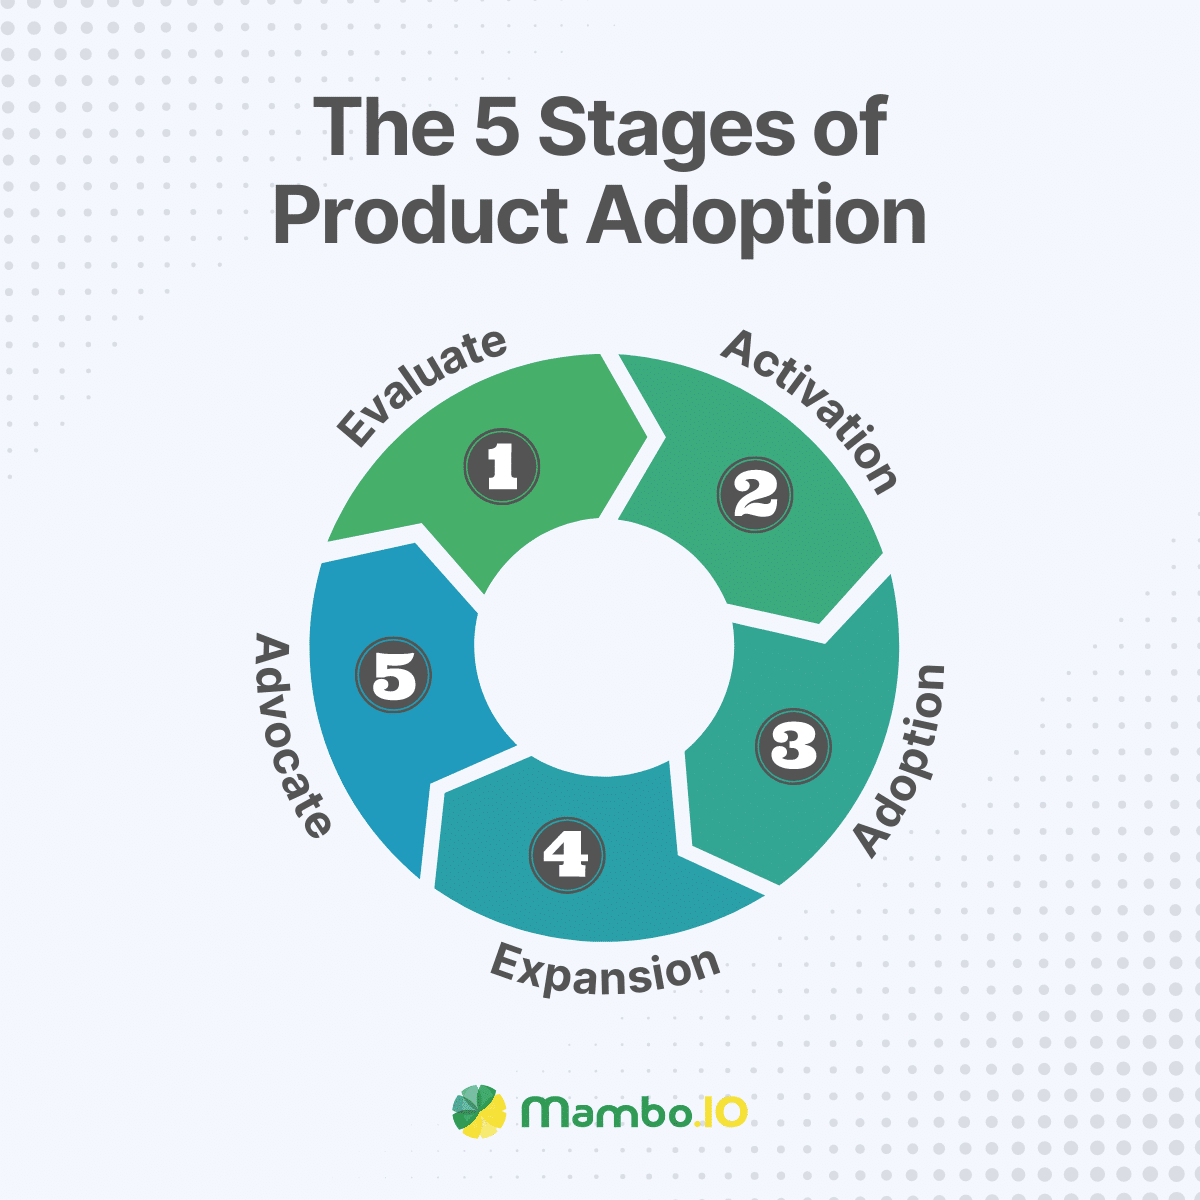 The 5 Stages of Product Adoption